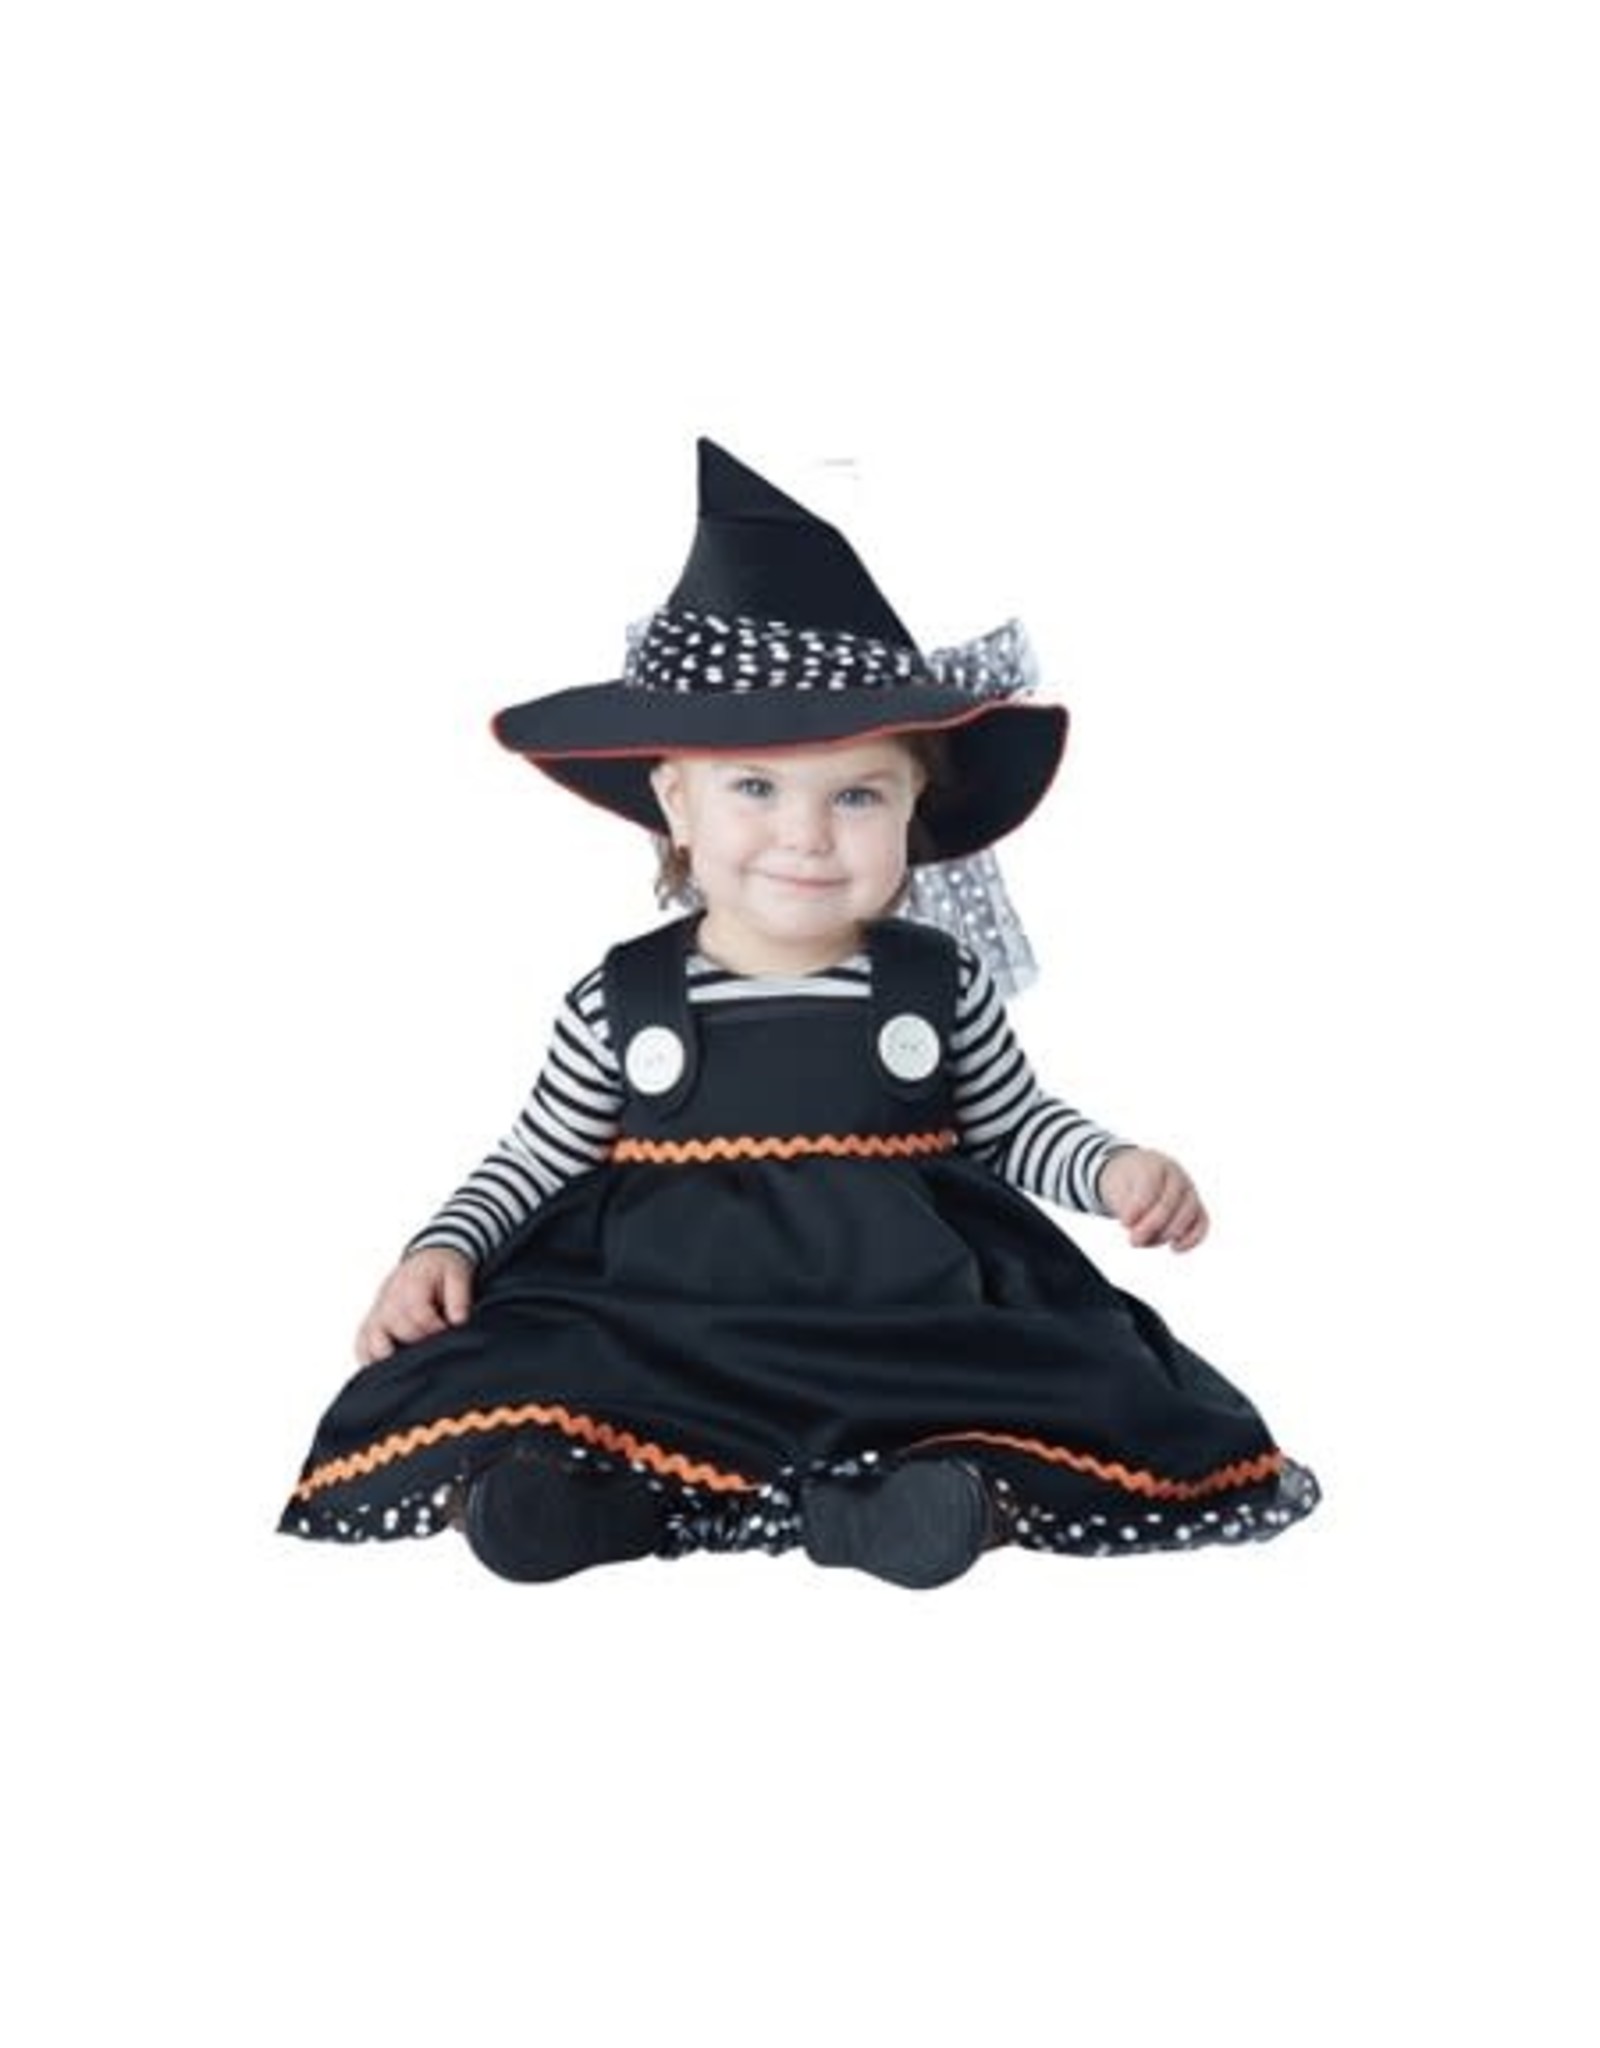 California Costume Collections Crafty Lil' Witch